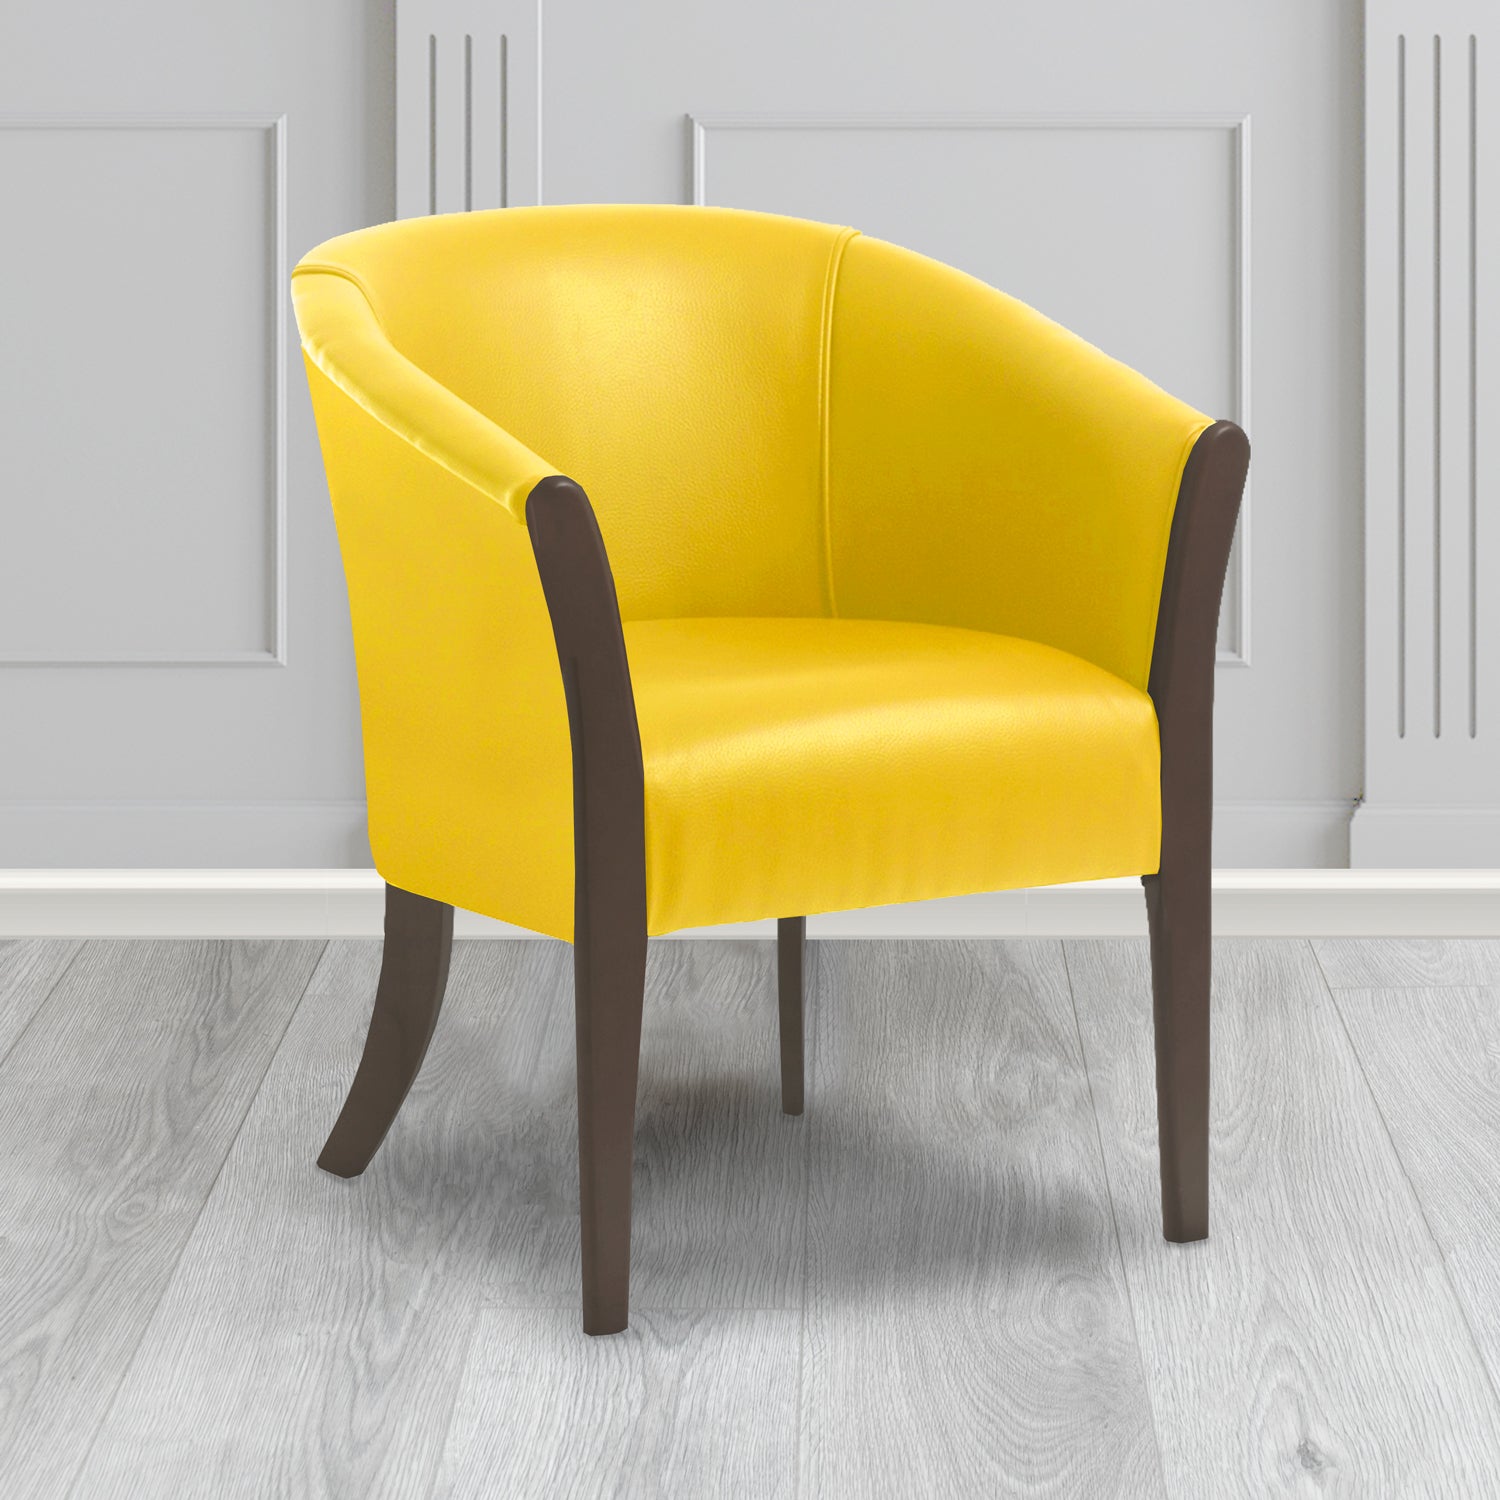 Hamilton Tub Chair in Agua Paint Pot Yellow Crib 5 Faux Leather - Antimicrobial, Stain Resistant & Waterproof - The Tub Chair Shop